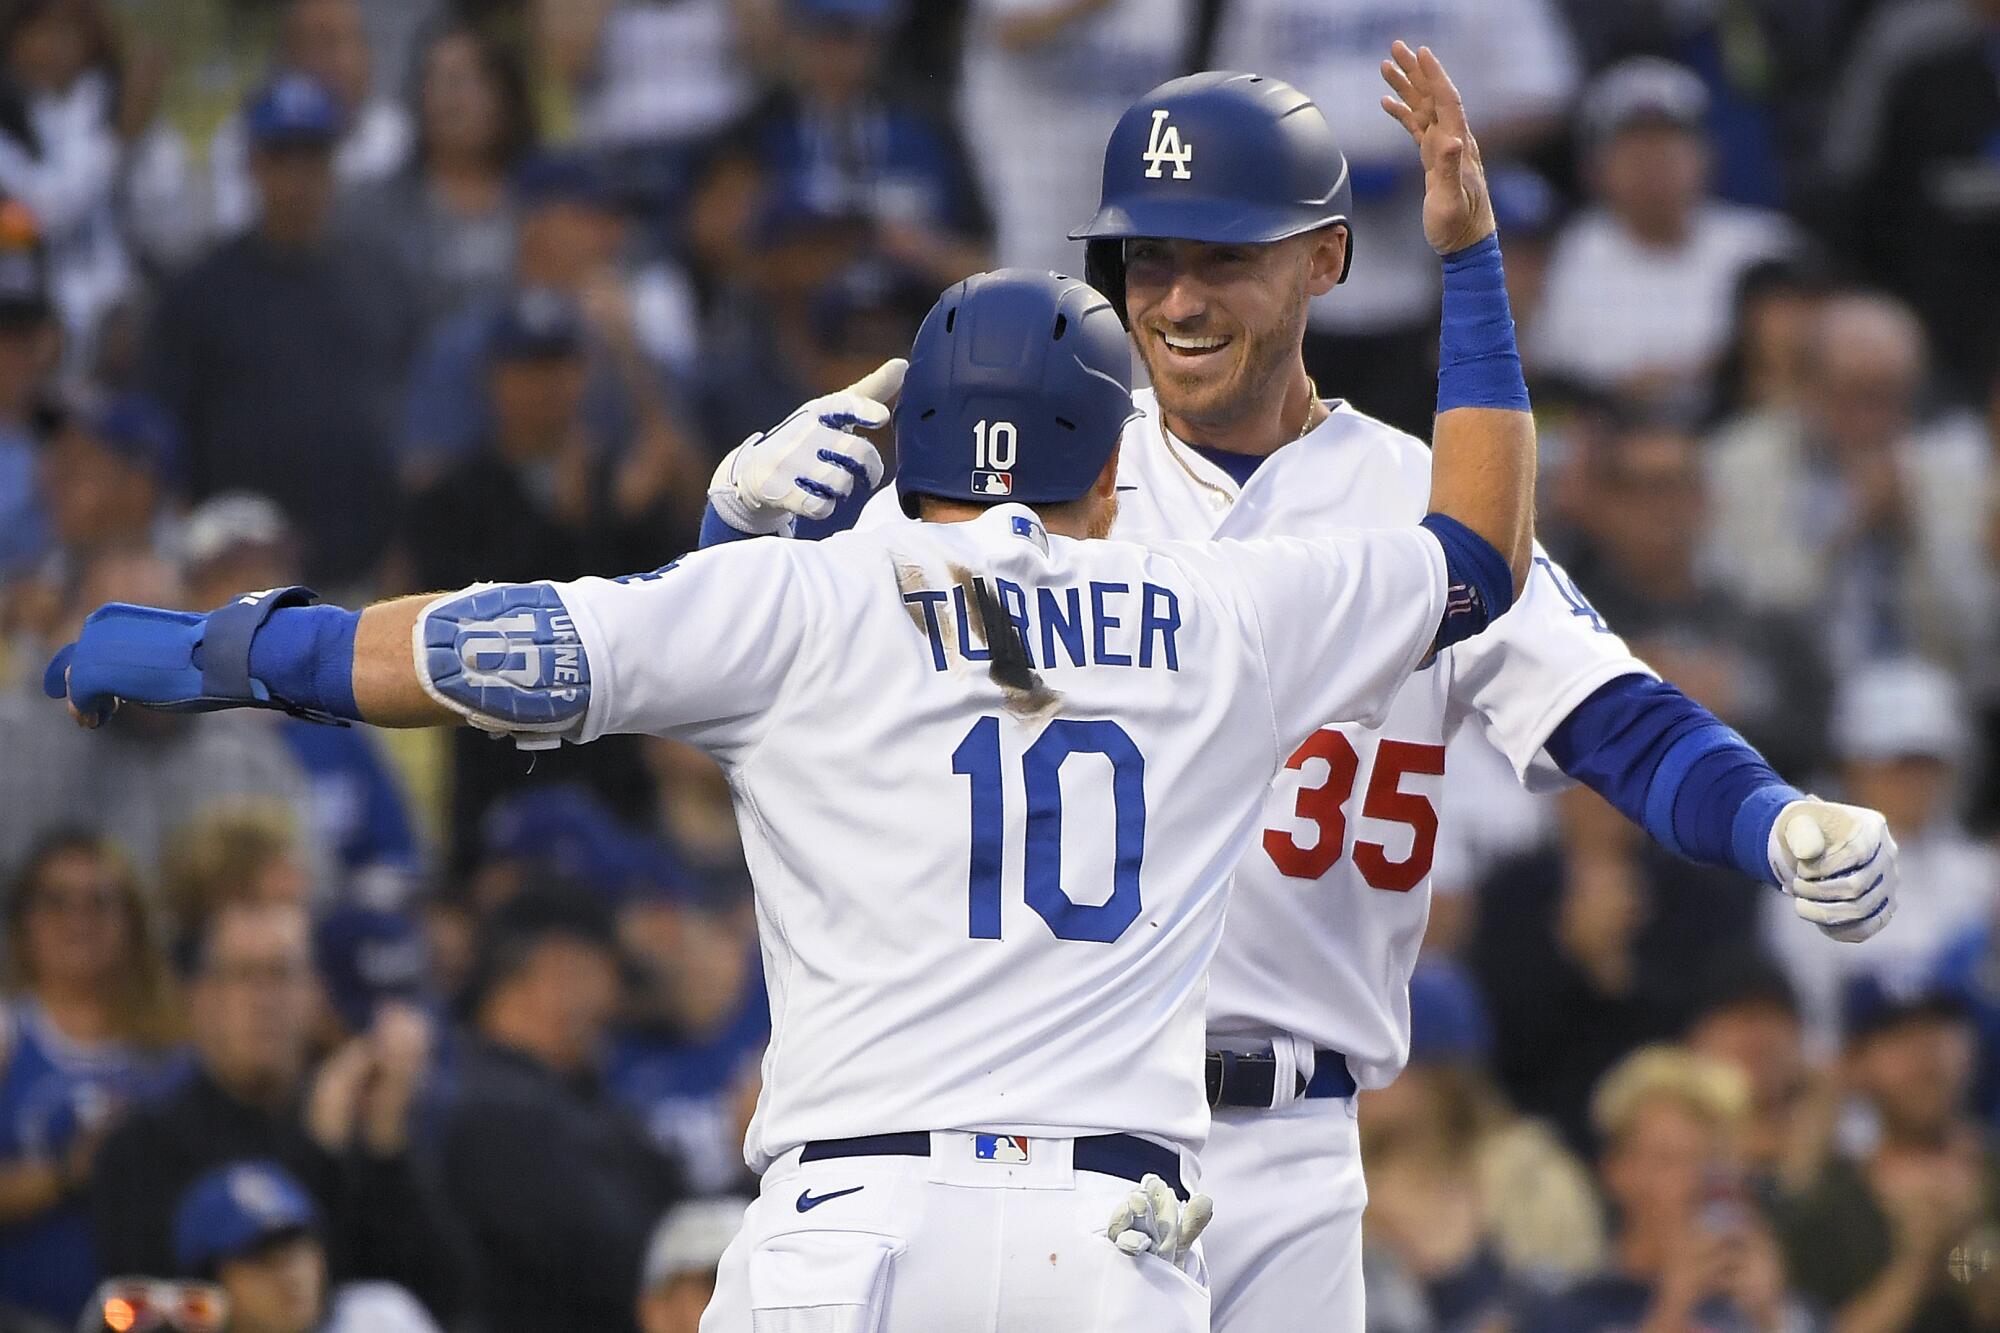 Cody Bellinger, right, celebrates with Dodgers teammate Justin Turner after hitting a two-run home run.